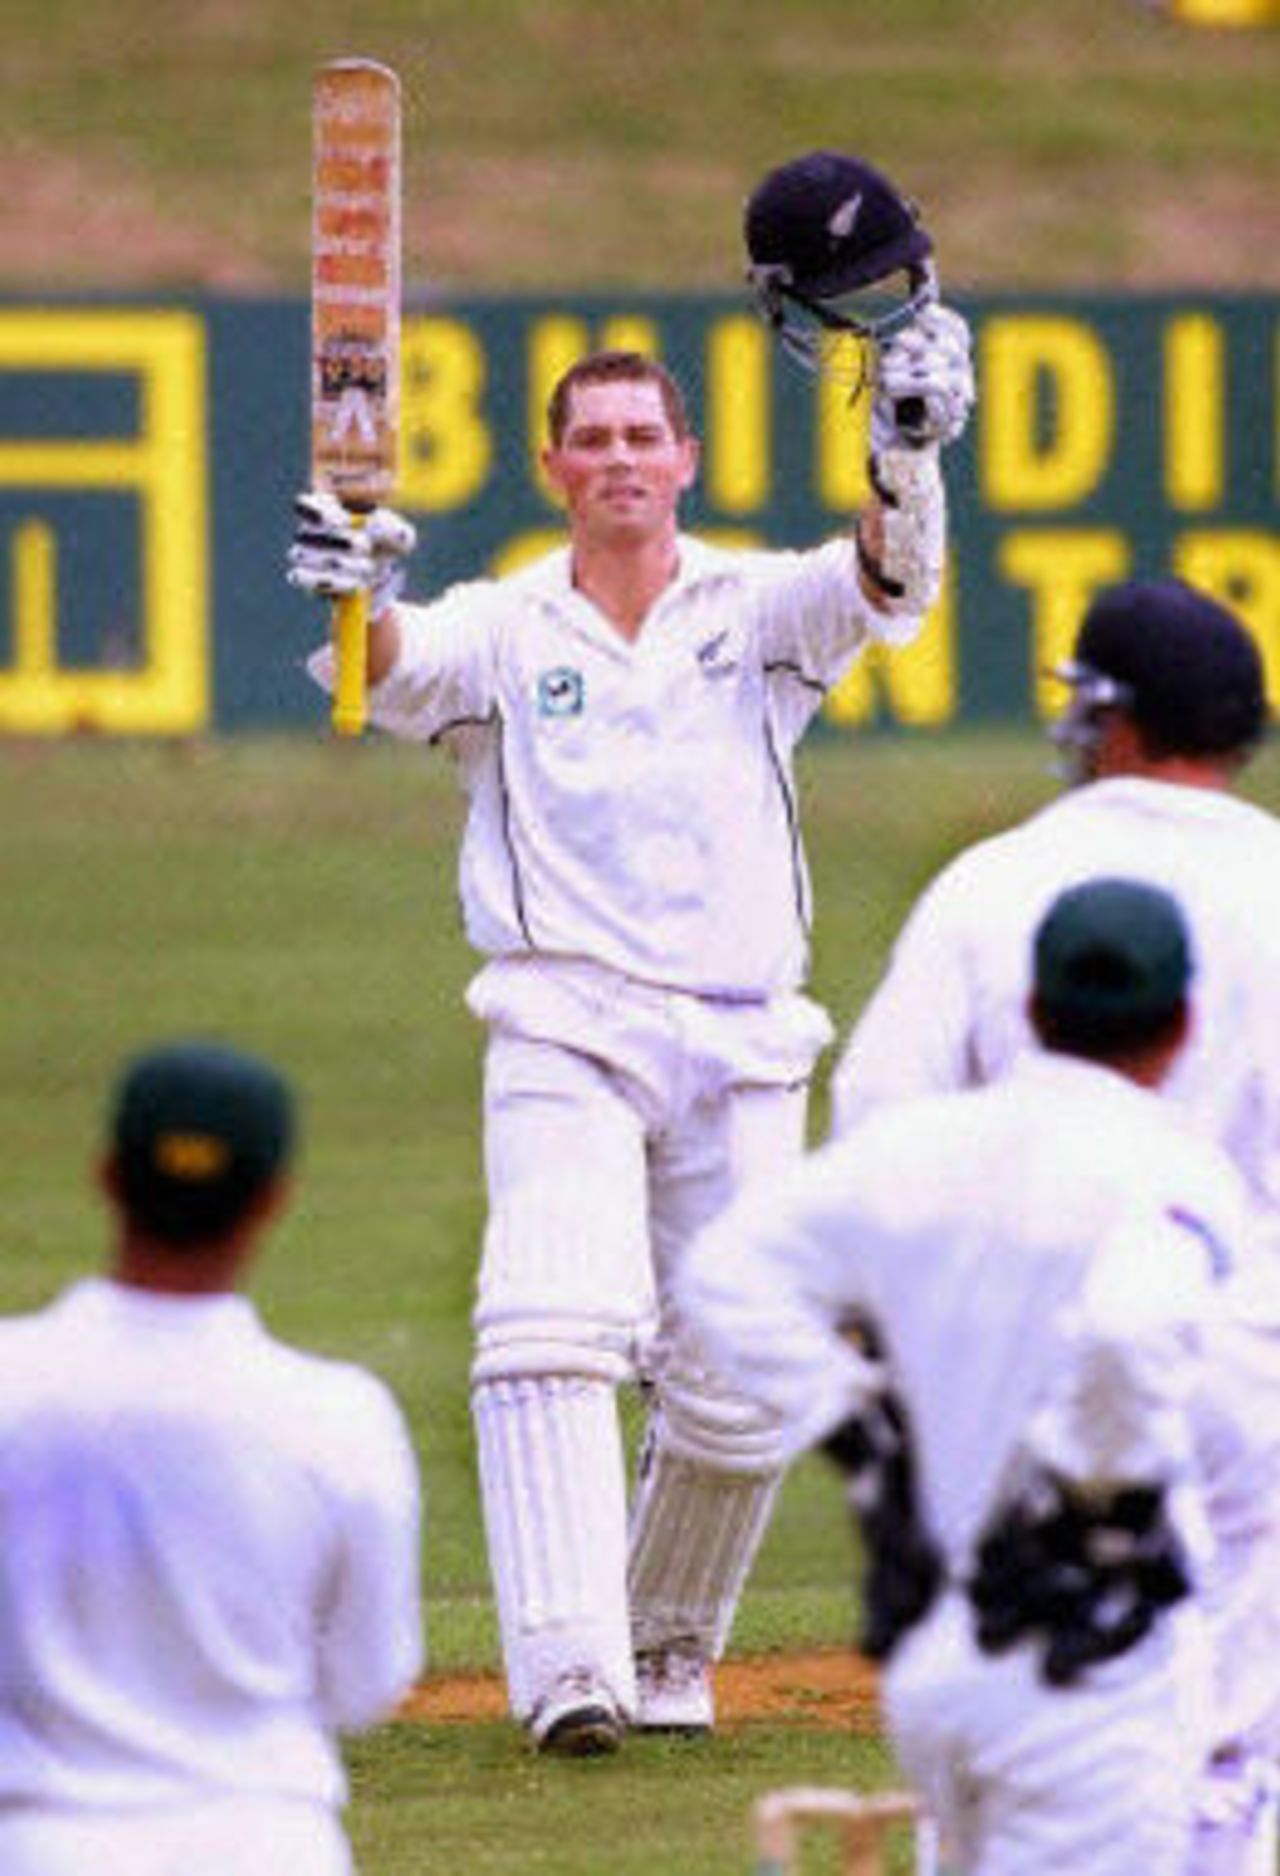 Matthew Bell raises his arms in triumph after scoring his first Test century, day 3, third Test, Hamilton 30 March 2001.